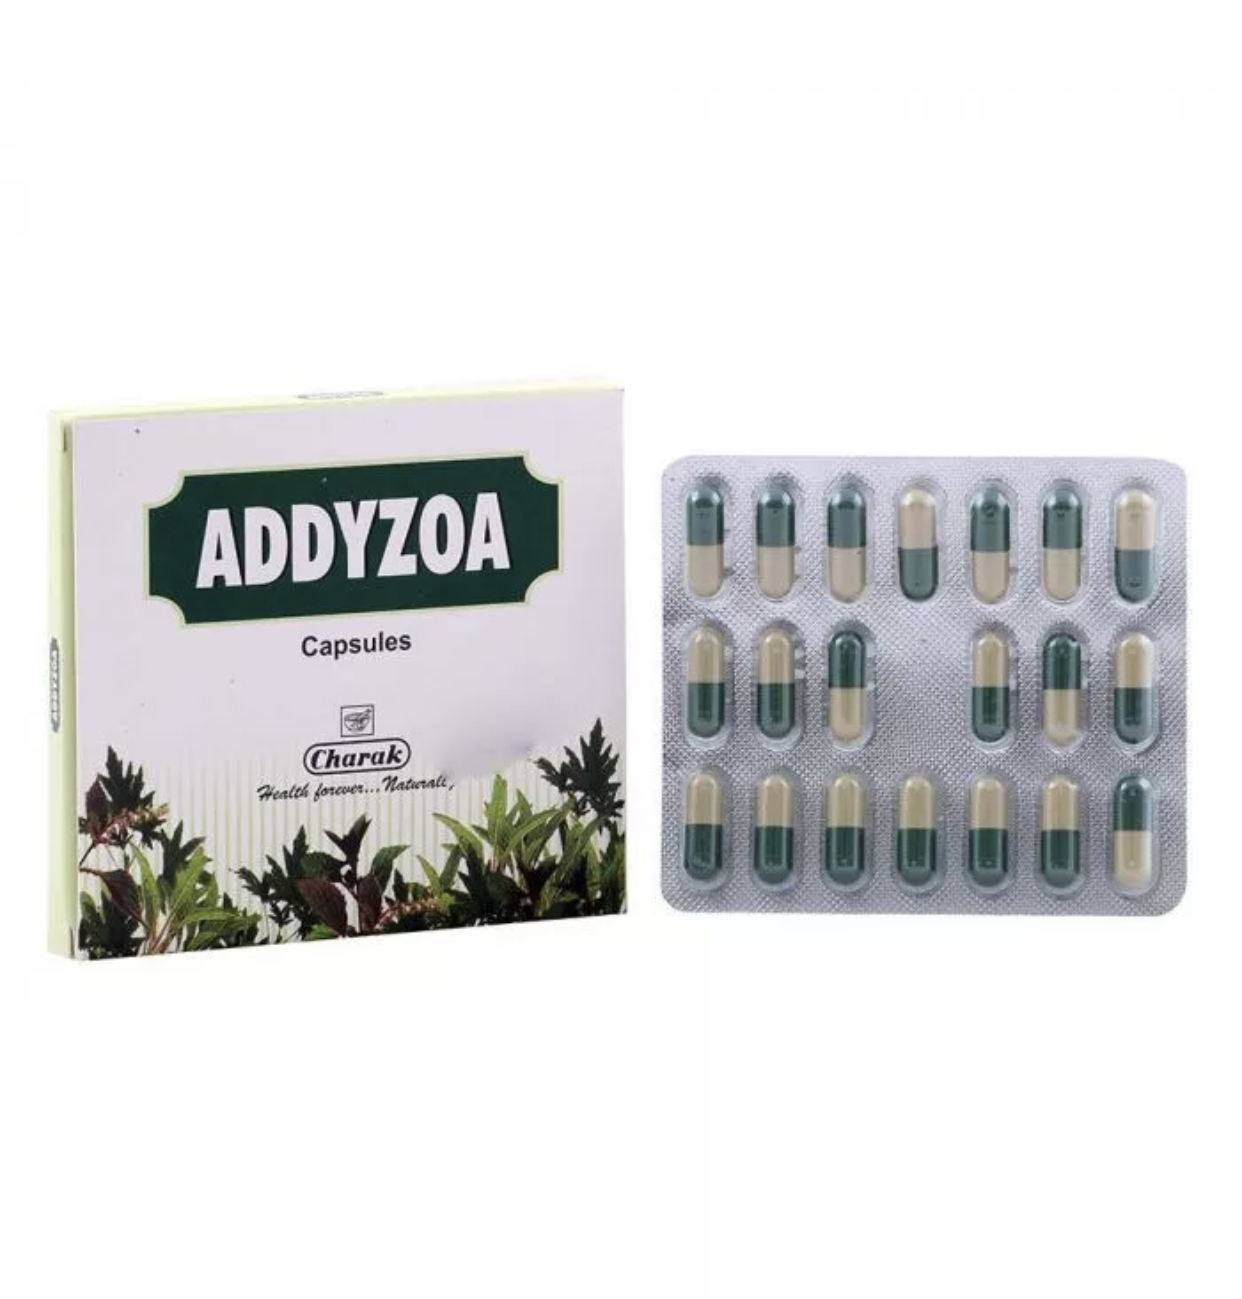 1681913540_addyzoa20capsules20-20Google20Search.png